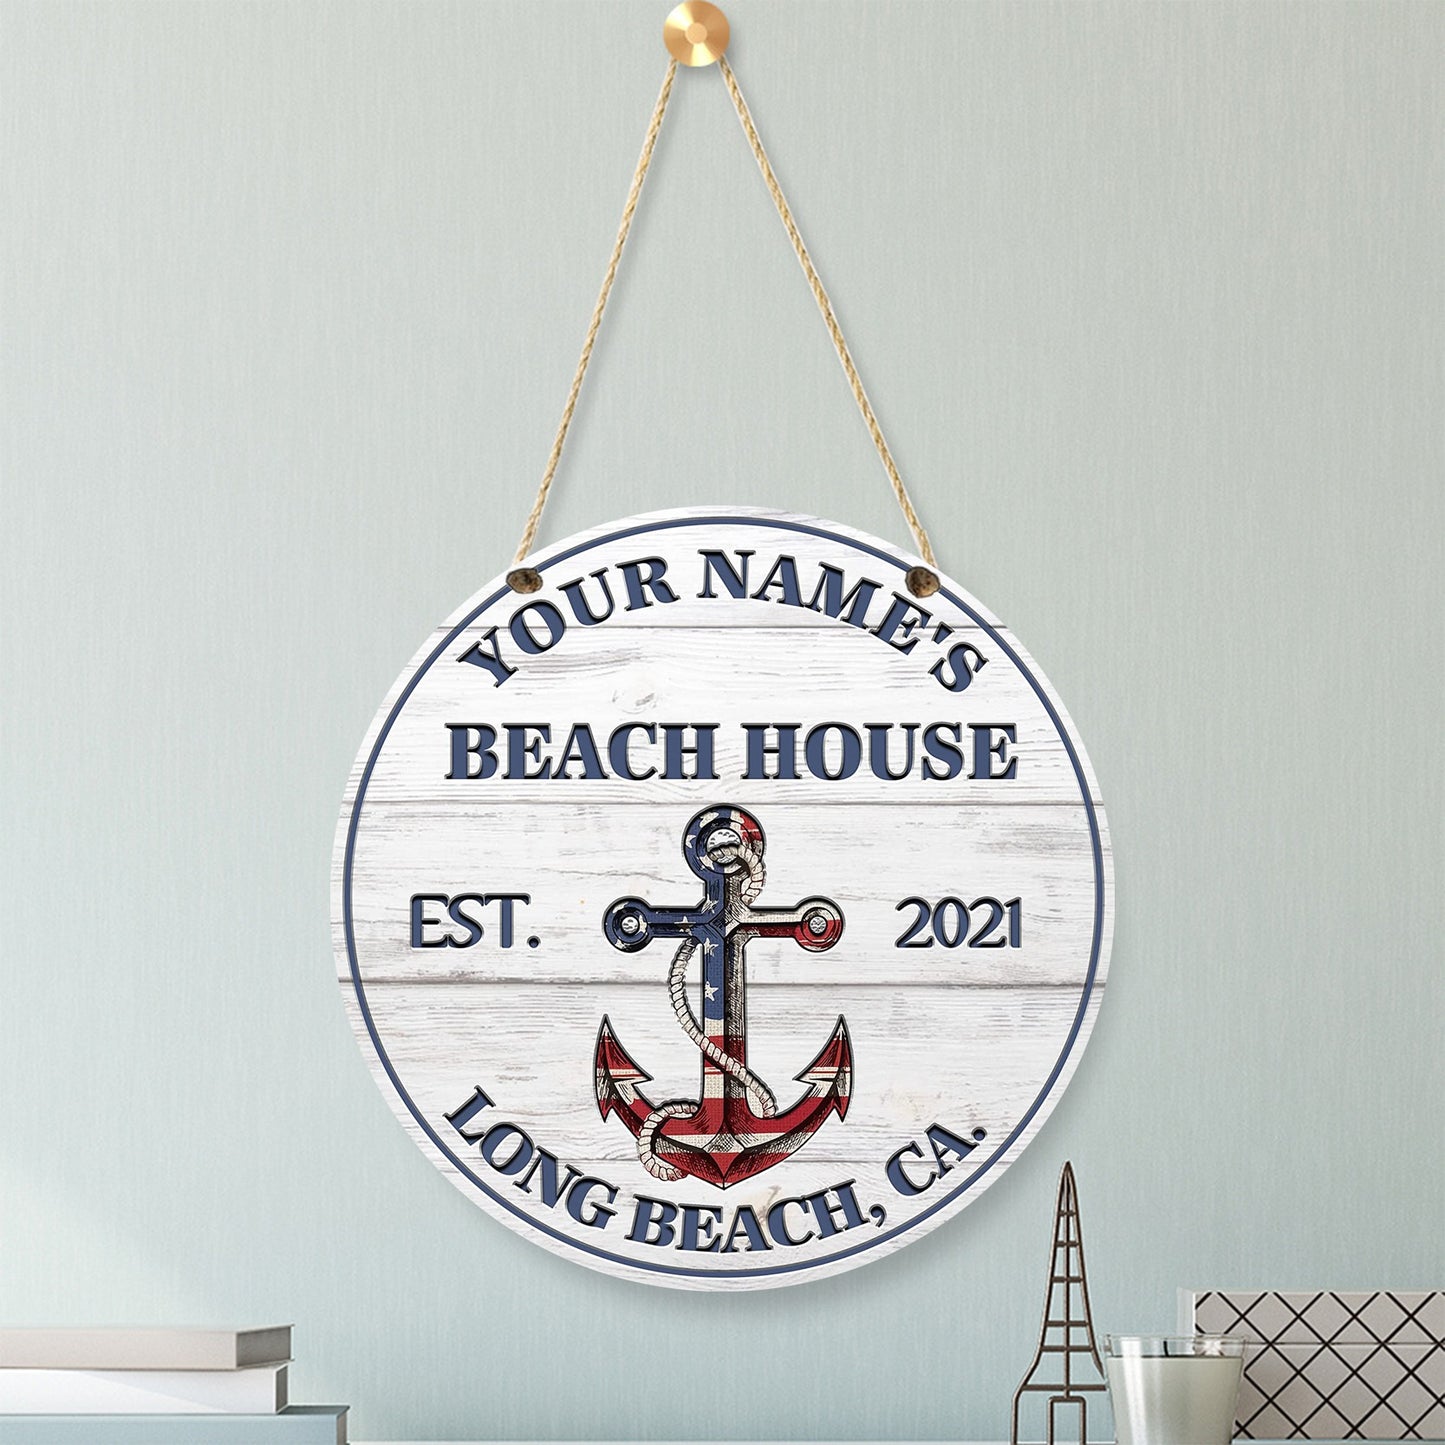 Personalized Round Wooden Anchor Beach House Sign - (Not Carved)